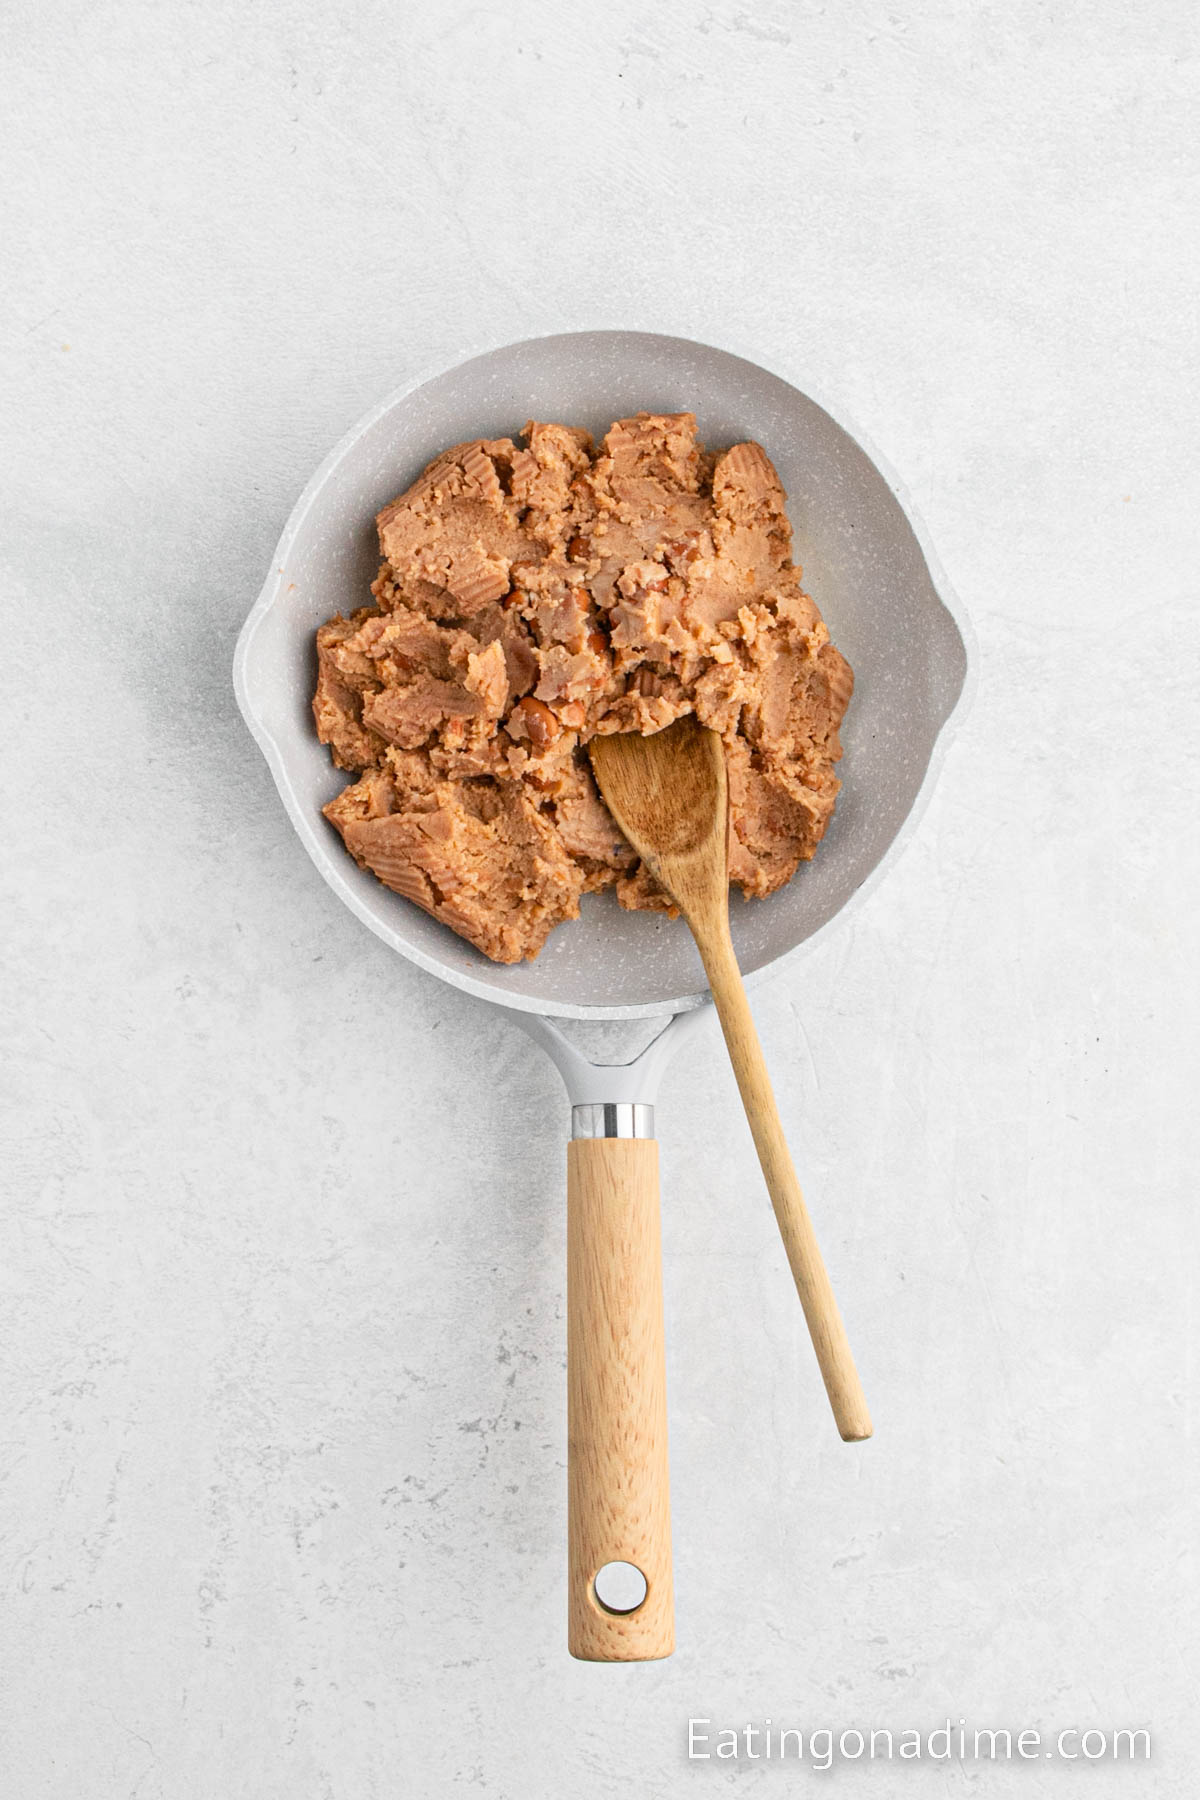 Heating the refried beans in a skillet with a wooden spoon